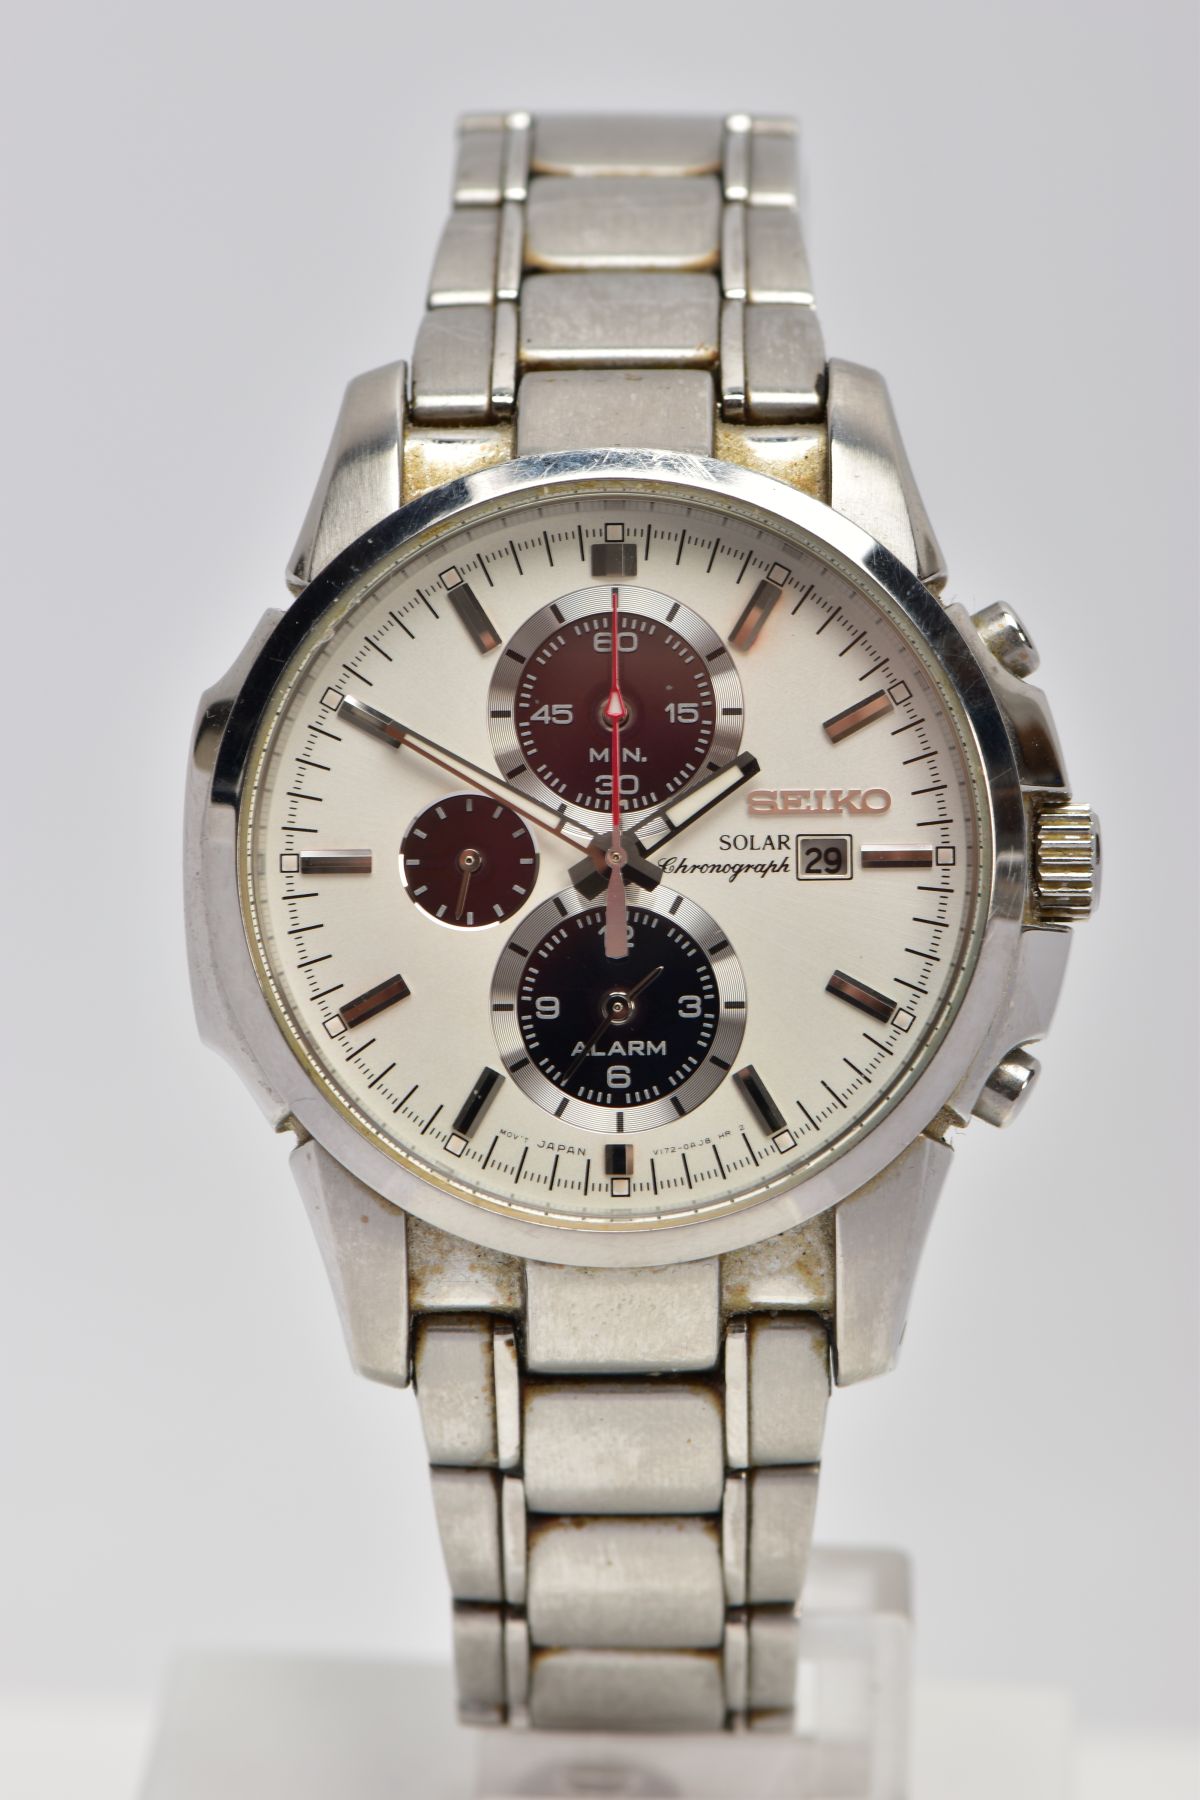 A SEIKO SOLAR CHRONOGRAPH ALARM STAINLESS STEEL WRISTWATCH, silvered dial with black subsidiary